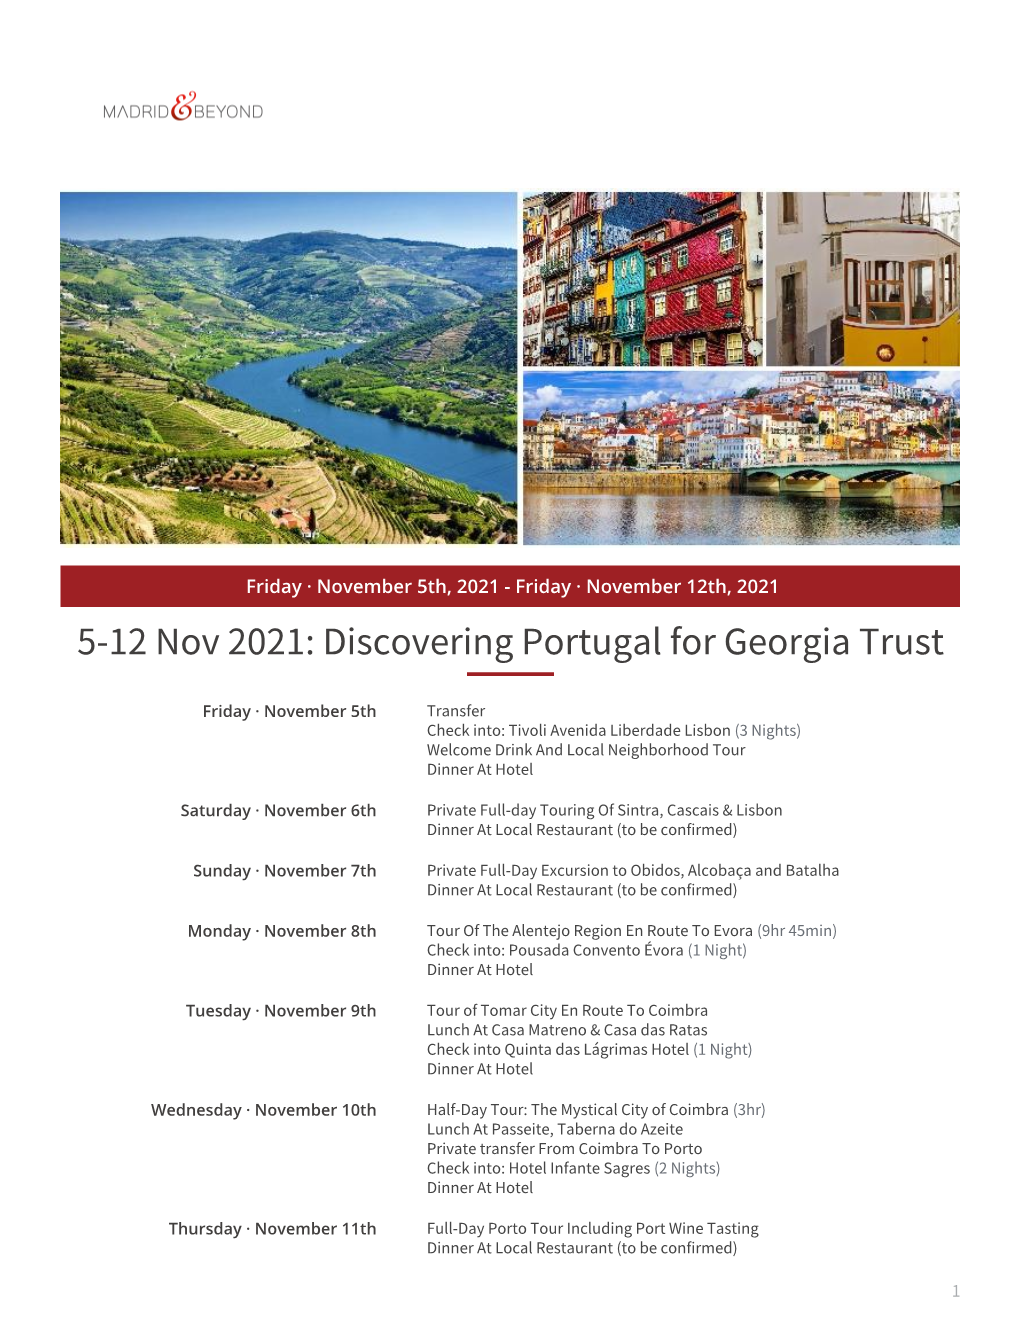 Discovering Portugal for Georgia Trust